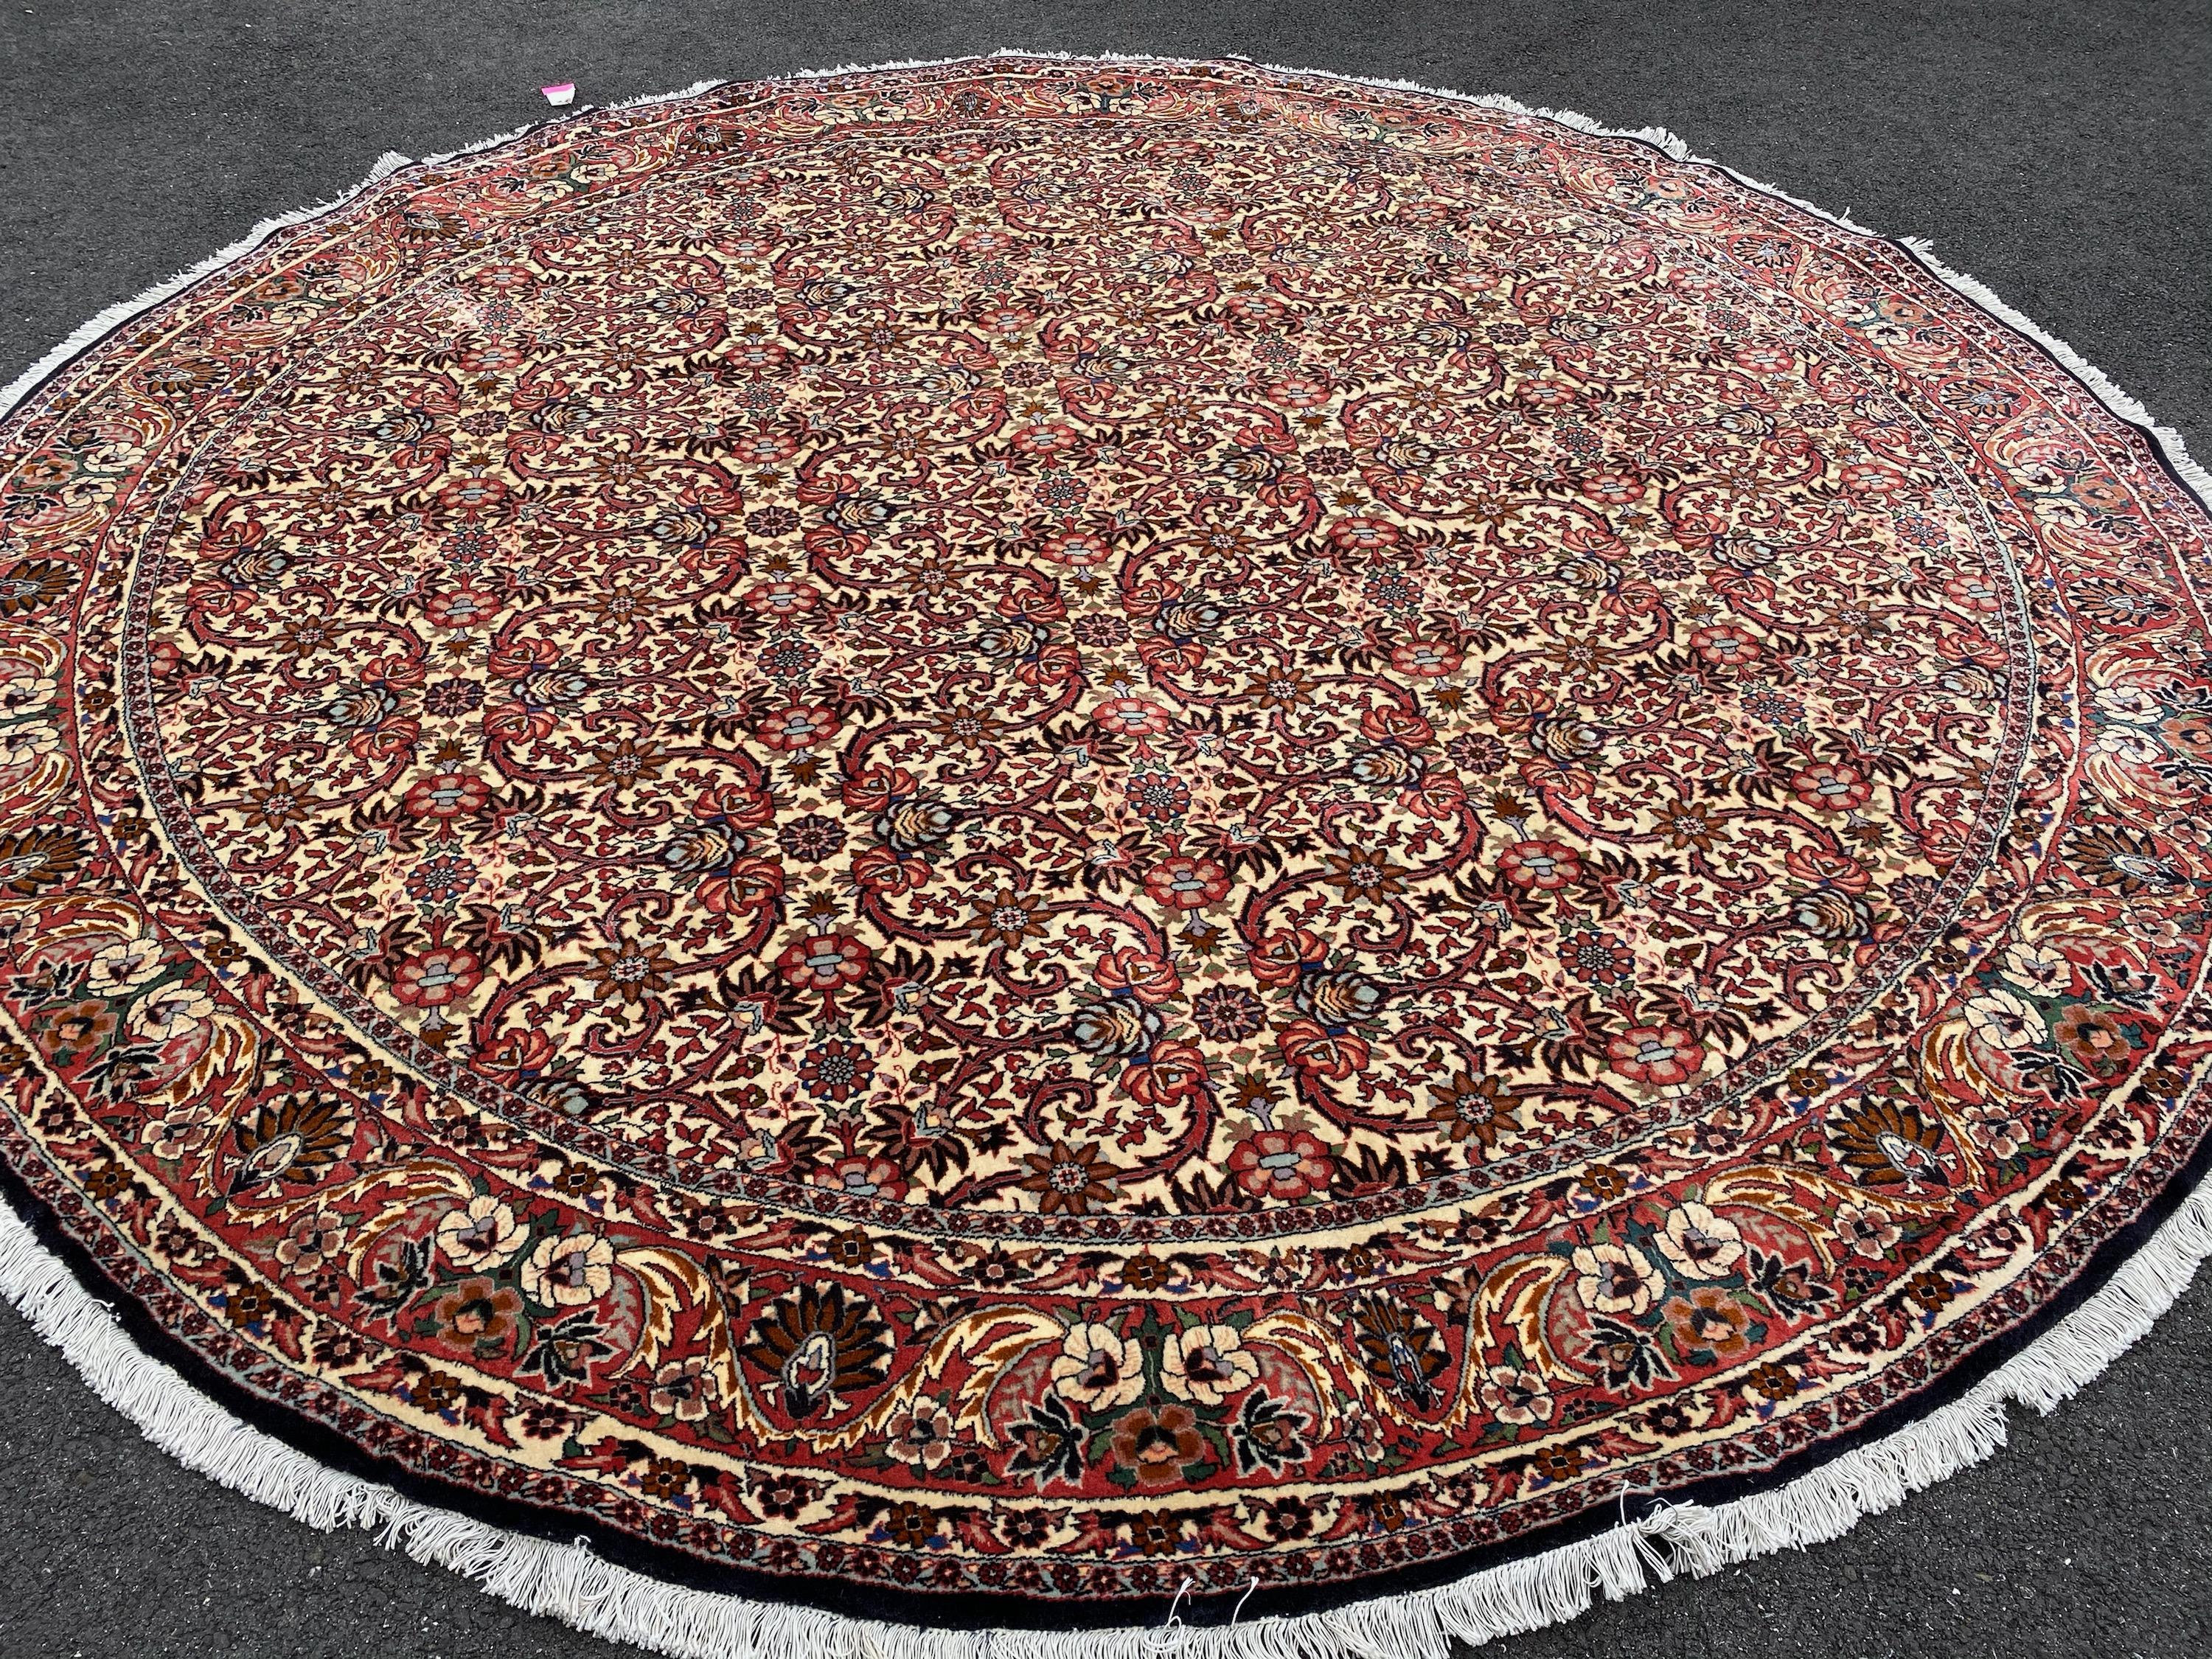 Late 20th Century Semi Antique Round Circular Red Brown Navy Blue Ivory Floral Persian Bijar Rug For Sale